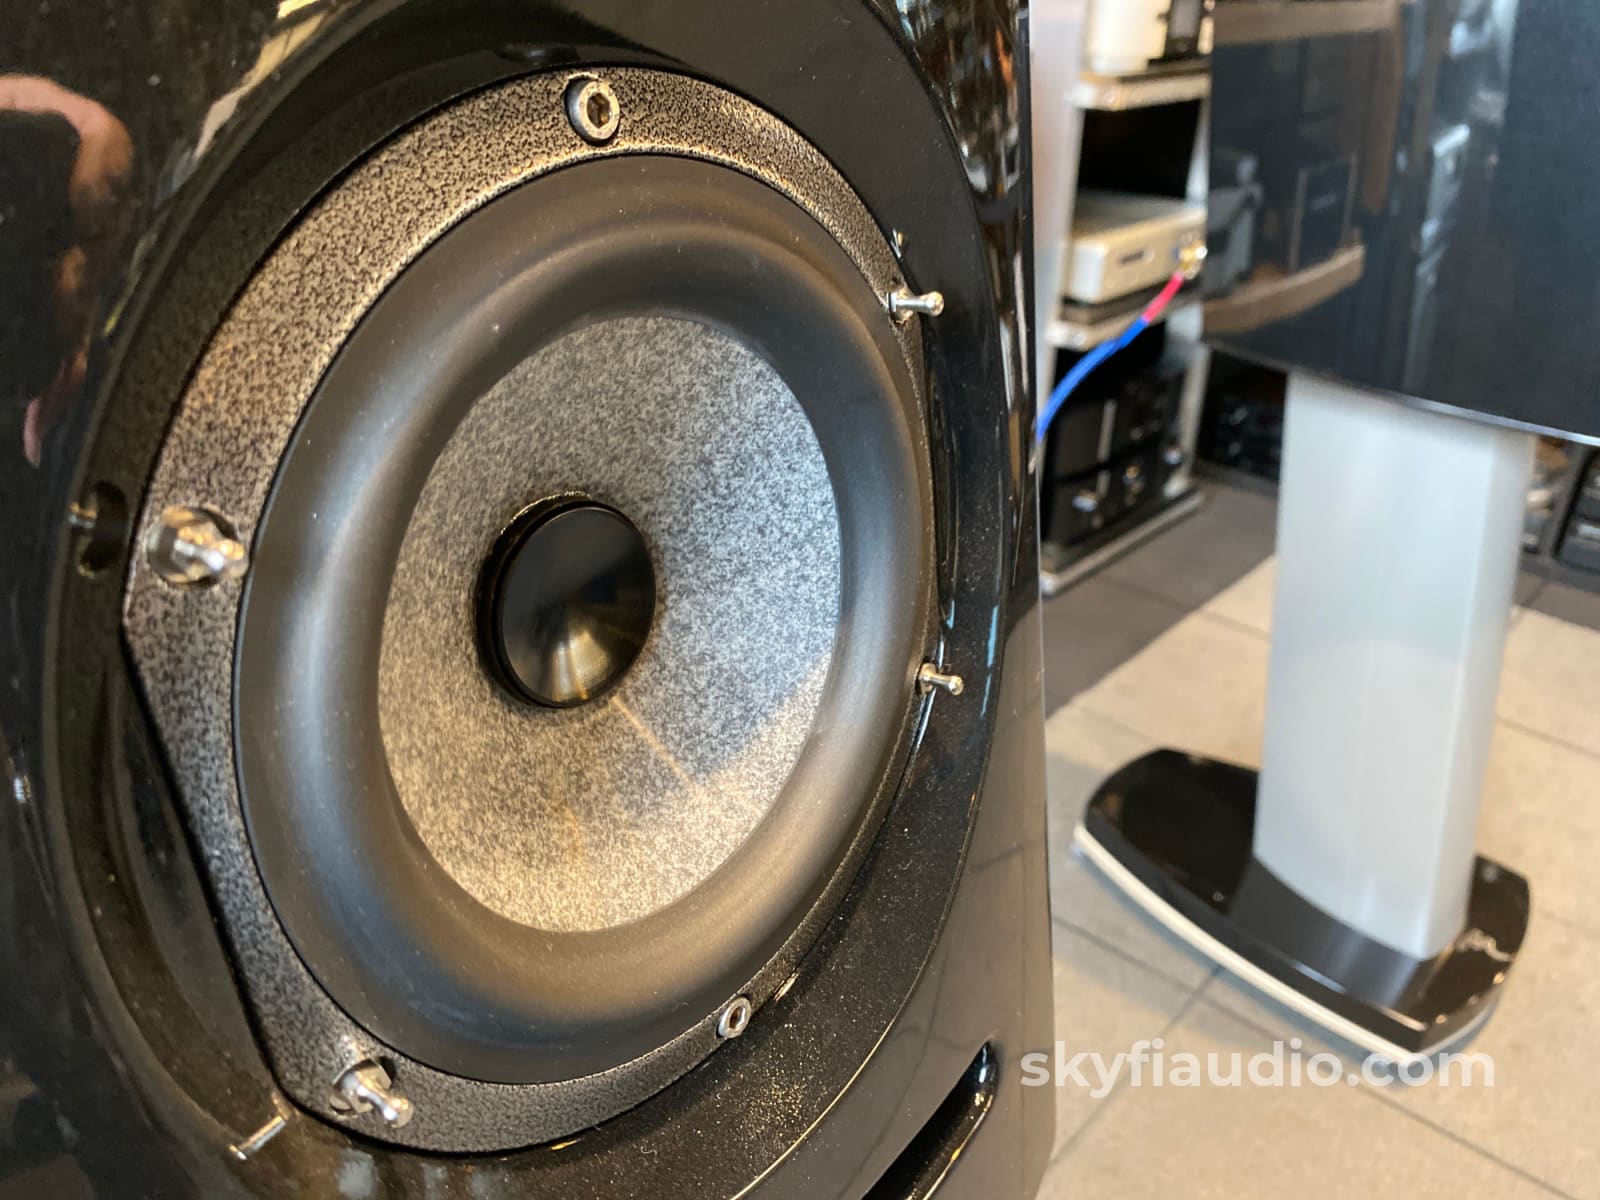 Focal Diablo Utopia Iii Speakers - As New And Complete With Stands